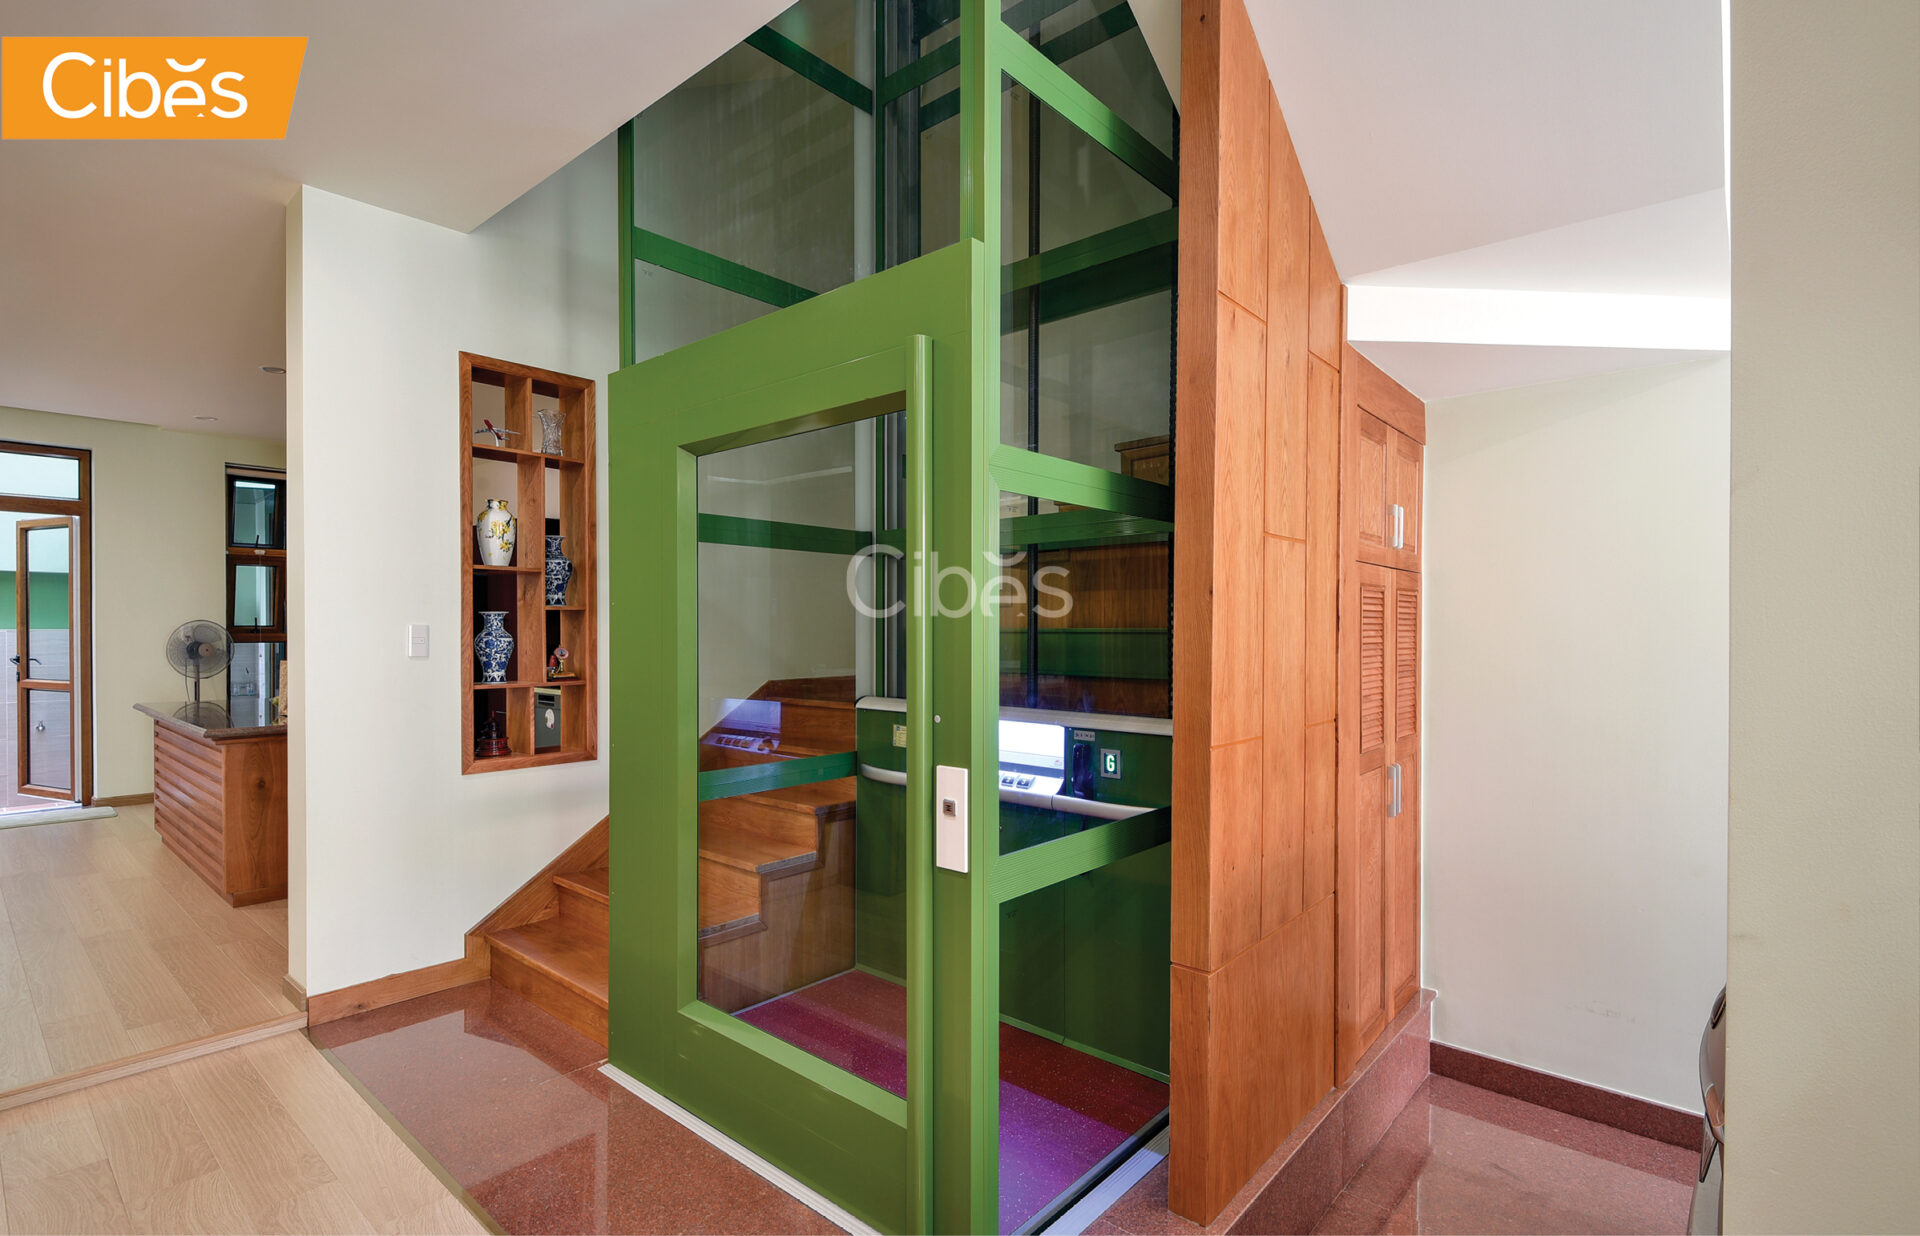 HOME LIFTS – Middle of stairs clas22